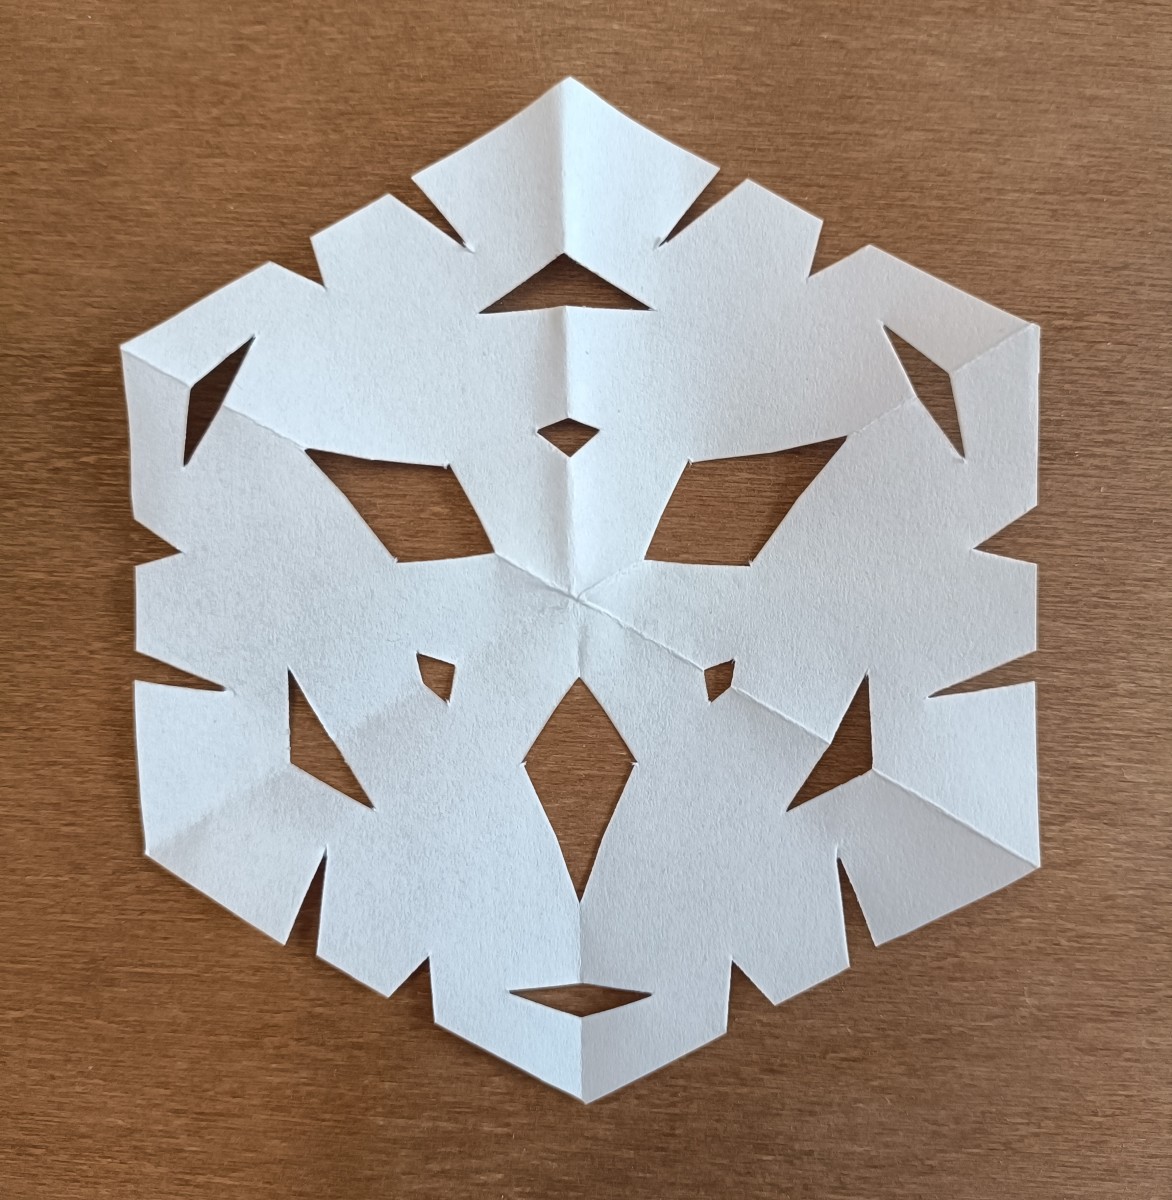 How to Make a Mathematical Paper Snowflake (Christmas Crafts) - FeltMagnet